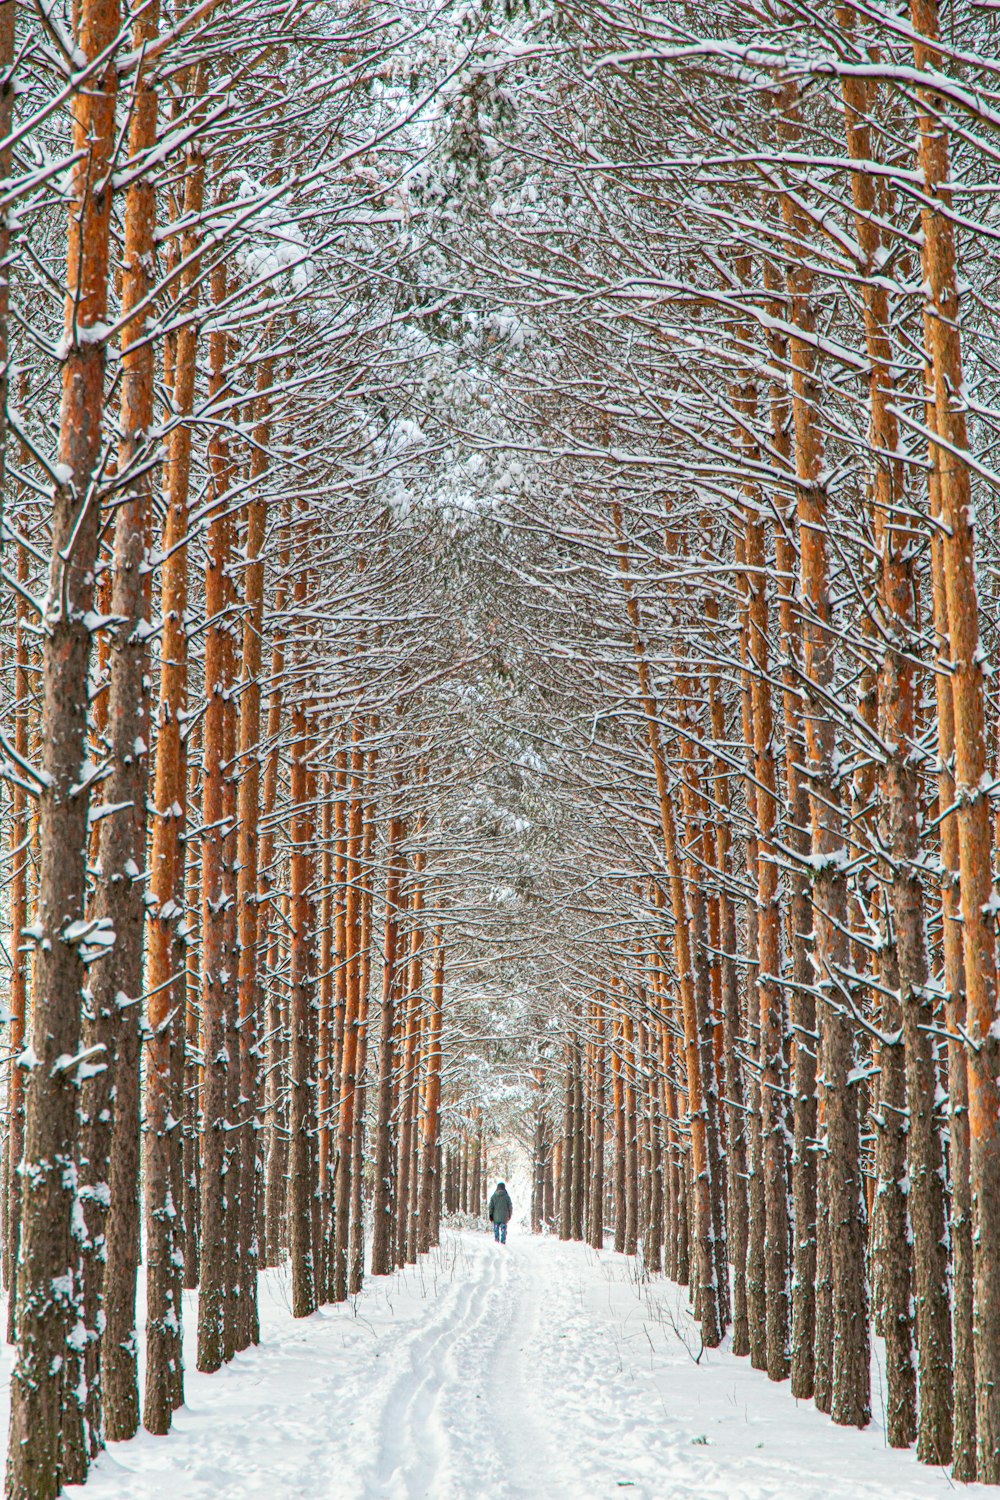 a person walking down a snow covered path through a forest